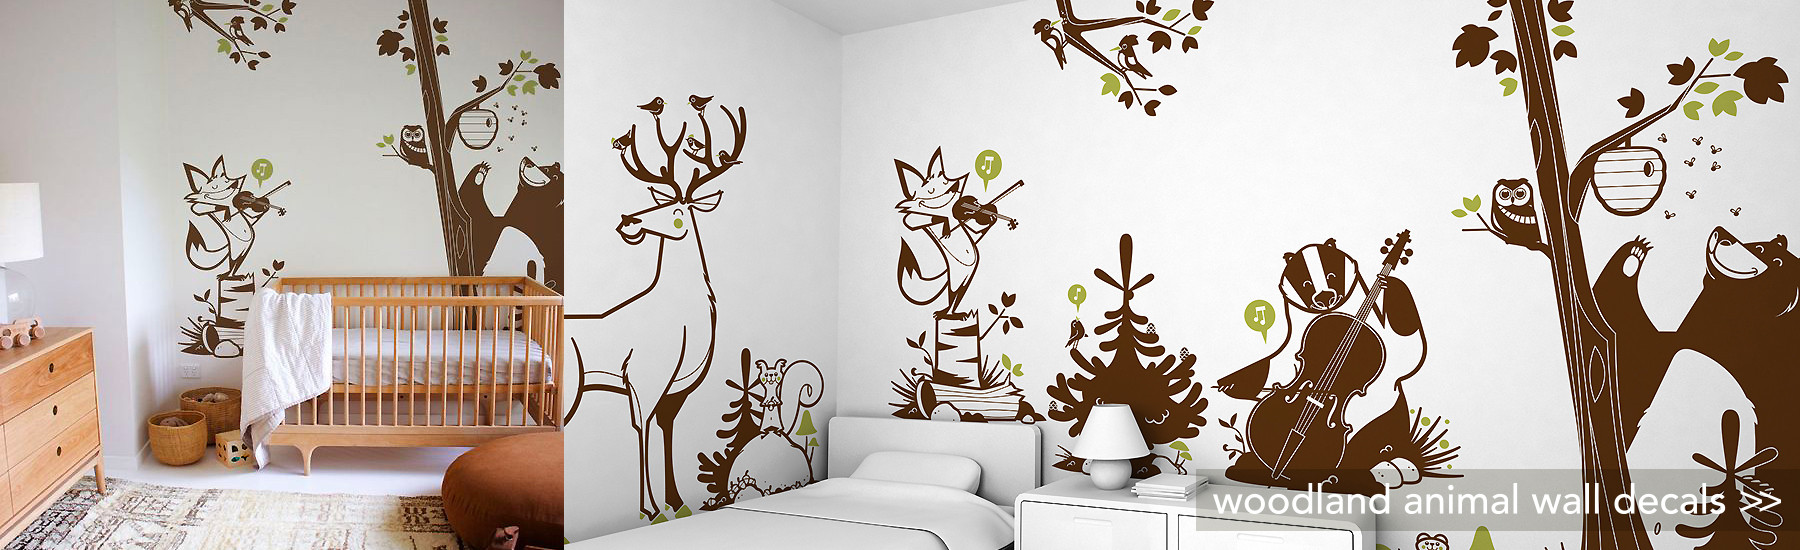 Forest Animal Wall Decals For Nursery And Kids Room - Wall Stickers - HD Wallpaper 